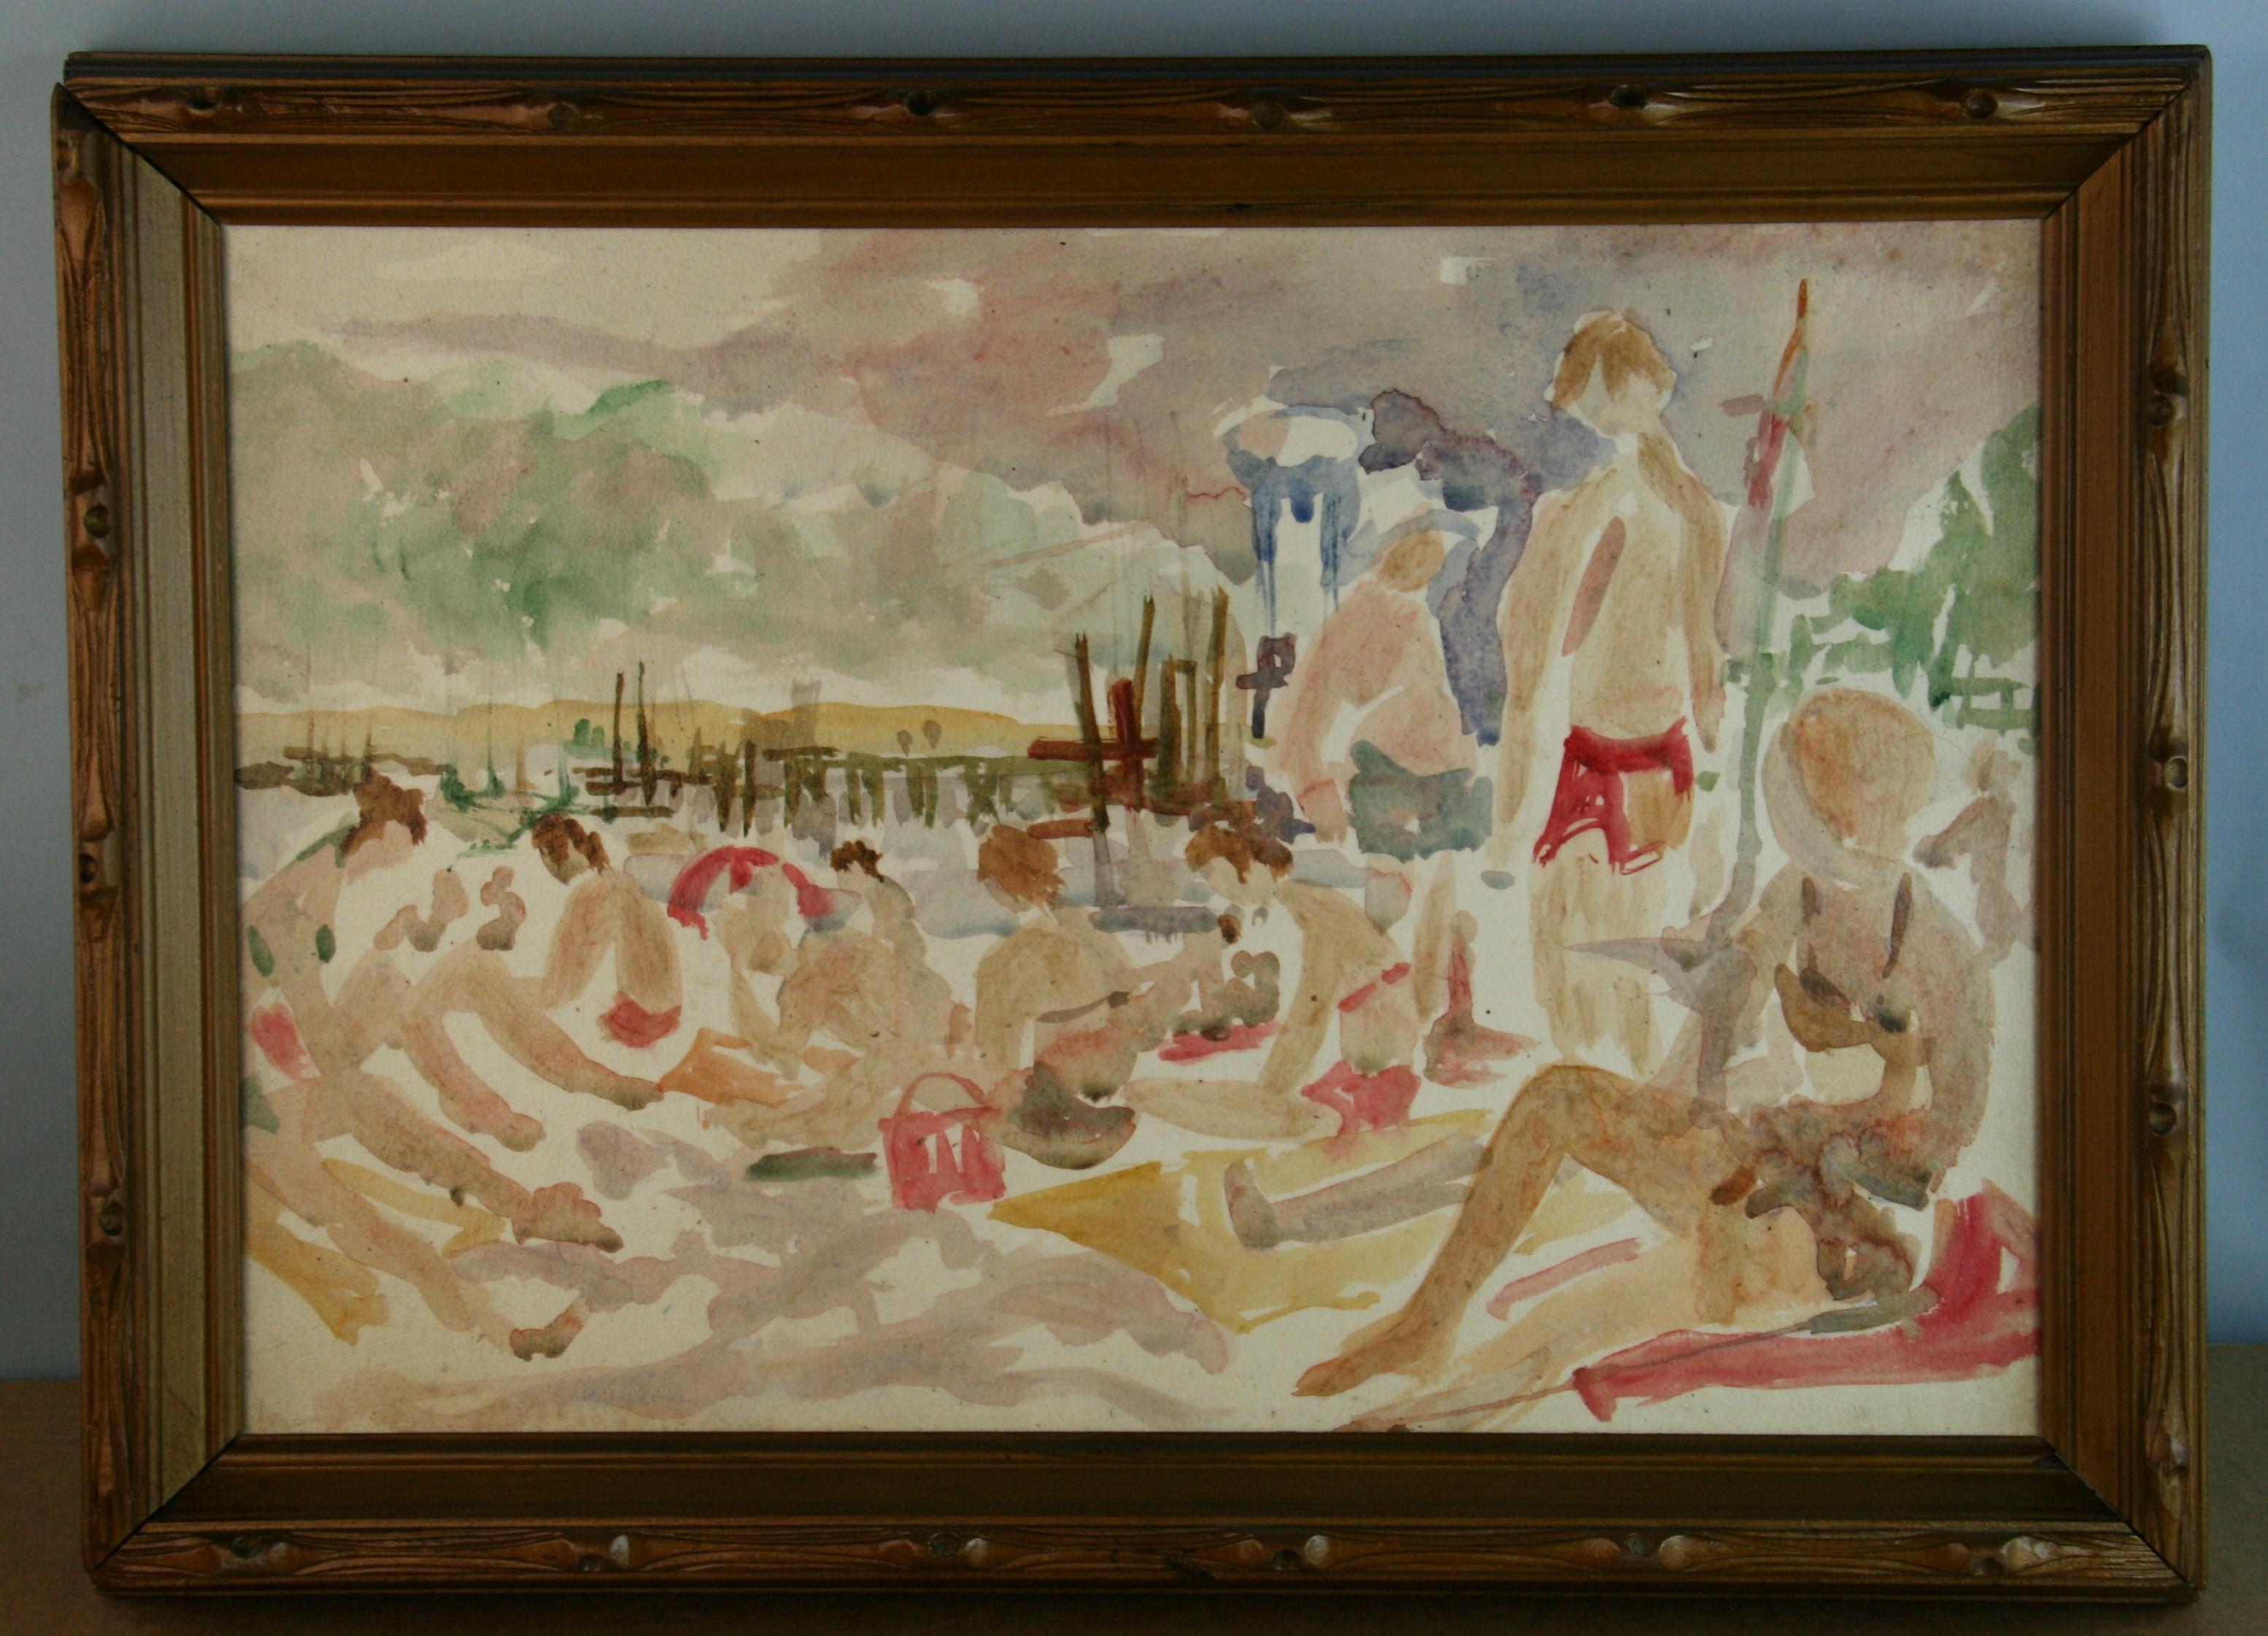 4062 Modern beach bathers gouache figural painting on artist board.
Set in a vintage carved walnut frame
Image size 14x21.5